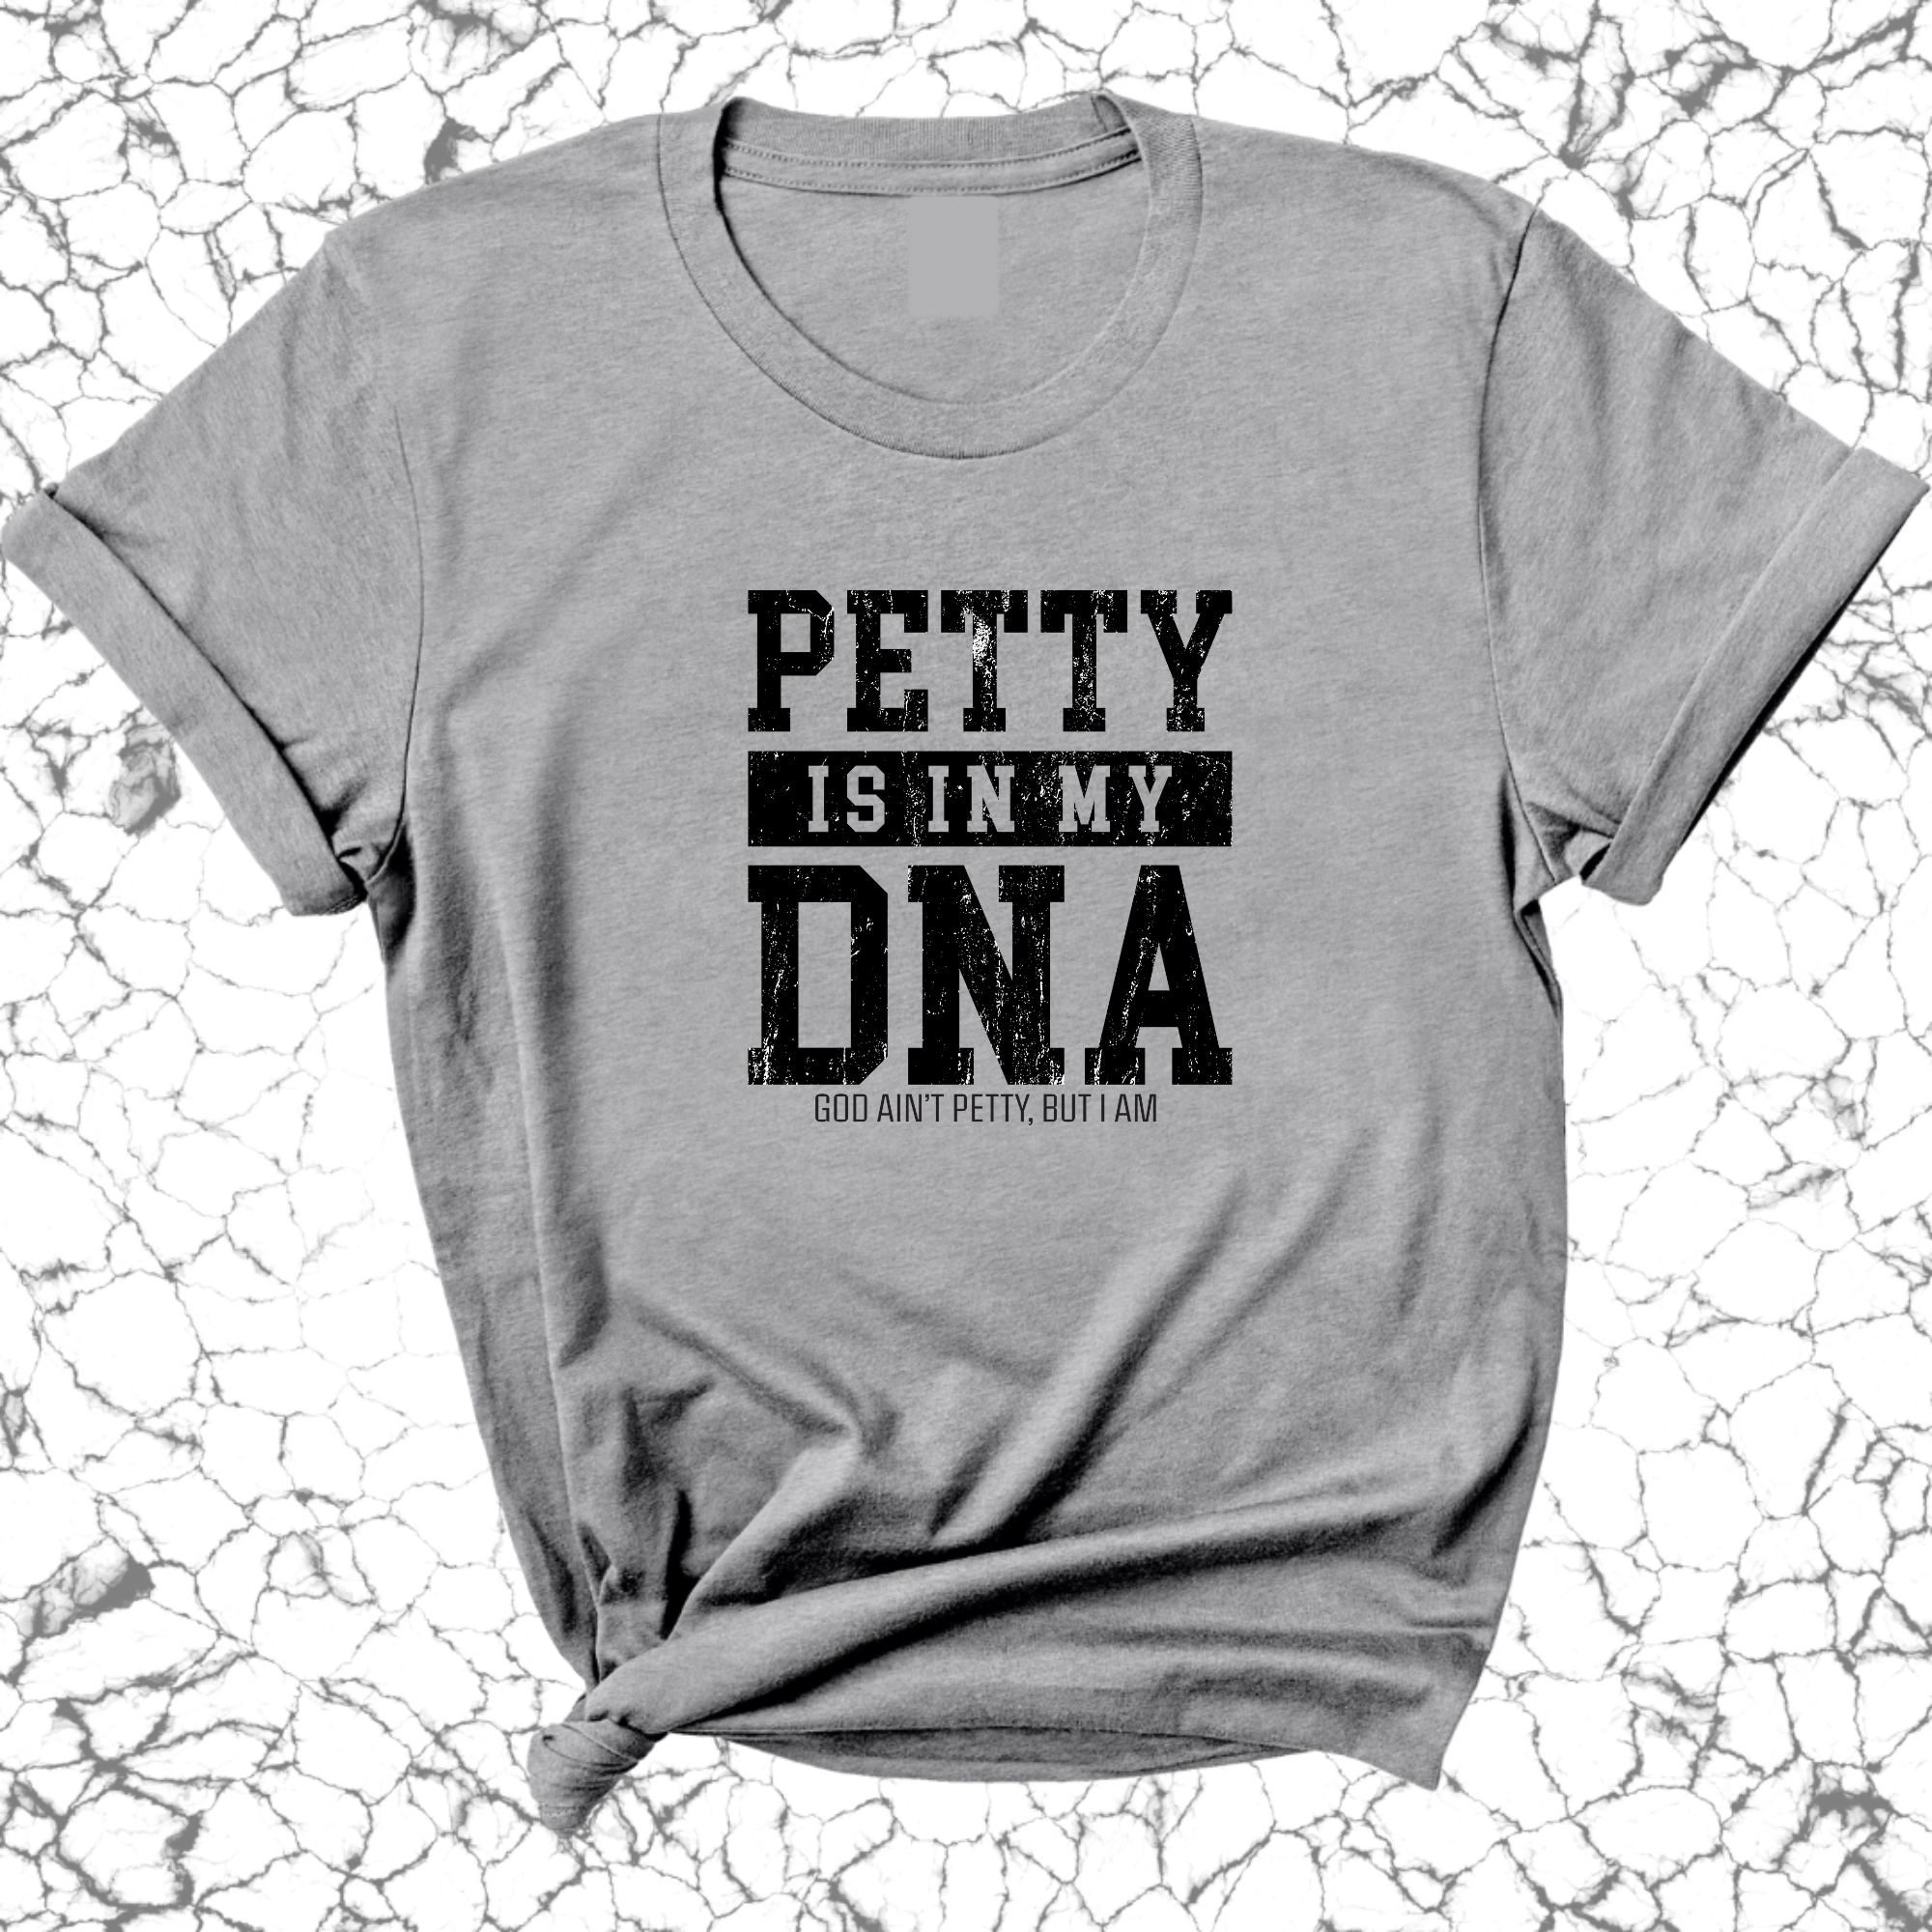 Petty is in my DNA Unisex Tee-T-Shirt-The Original God Ain't Petty But I Am